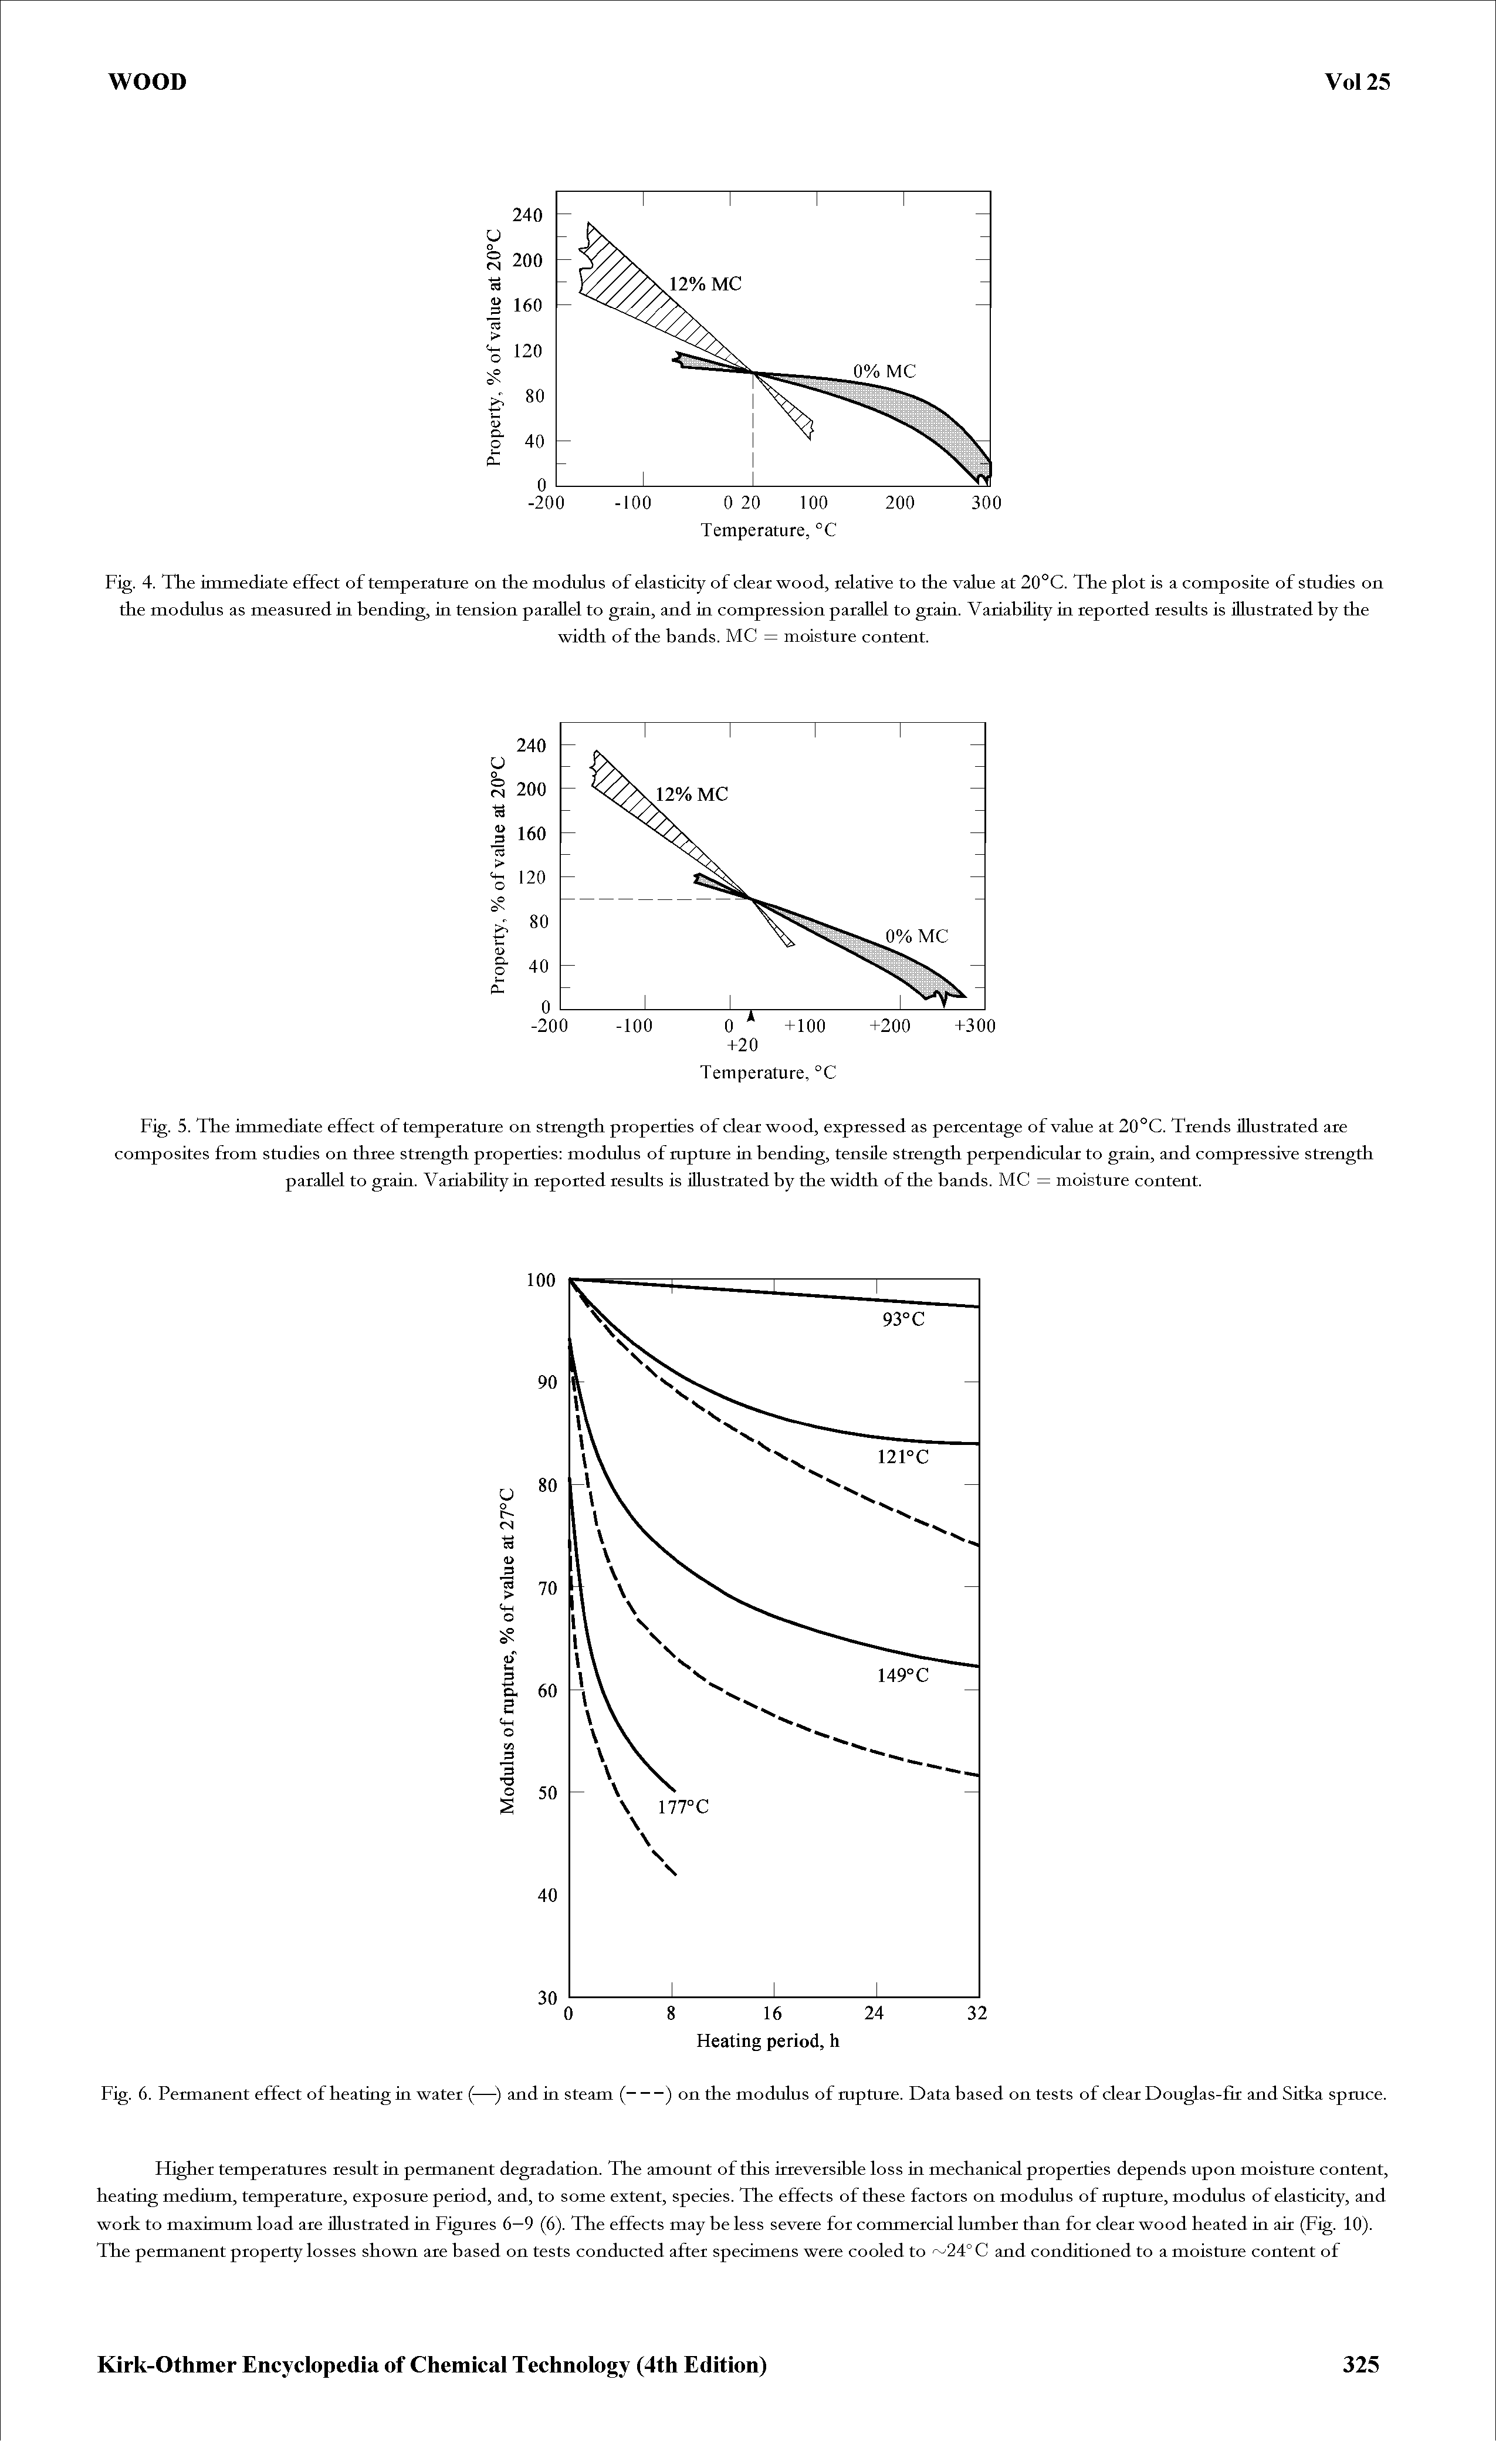 Fig. 4. The immediate effect of temperature on the modulus of elasticity of clear wood, relative to the value at 20°C. The plot is a composite of studies on the modulus as measured in hen ding, in tension parallel to grain, and in compression parallel to grain. VariabiUty in reported results is illustrated by the...